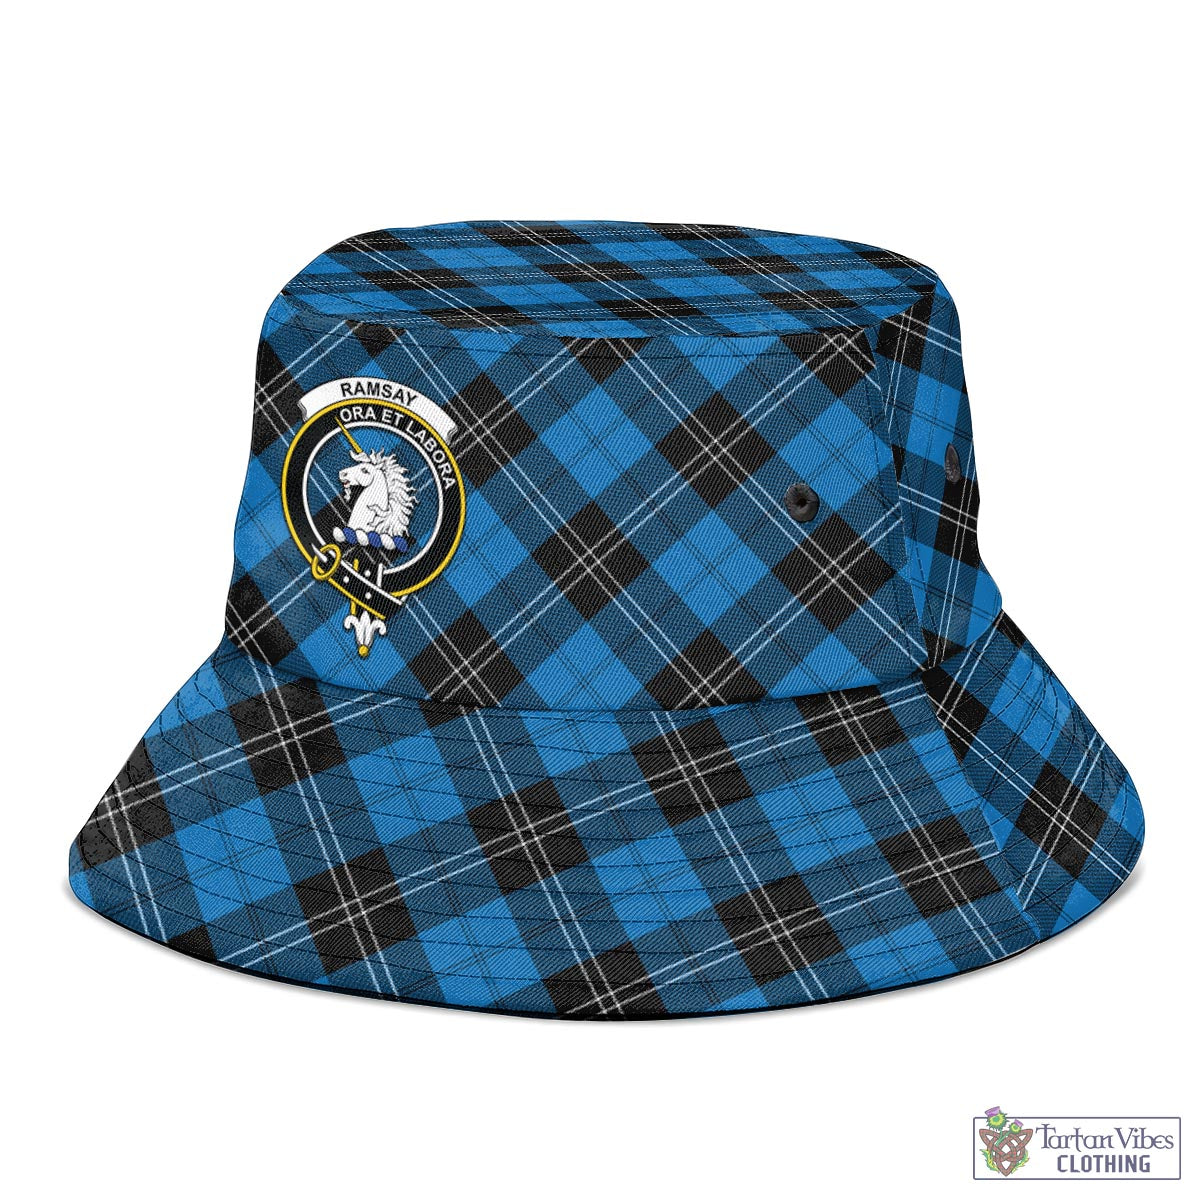 Tartan Vibes Clothing Ramsay Blue Ancient Tartan Bucket Hat with Family Crest